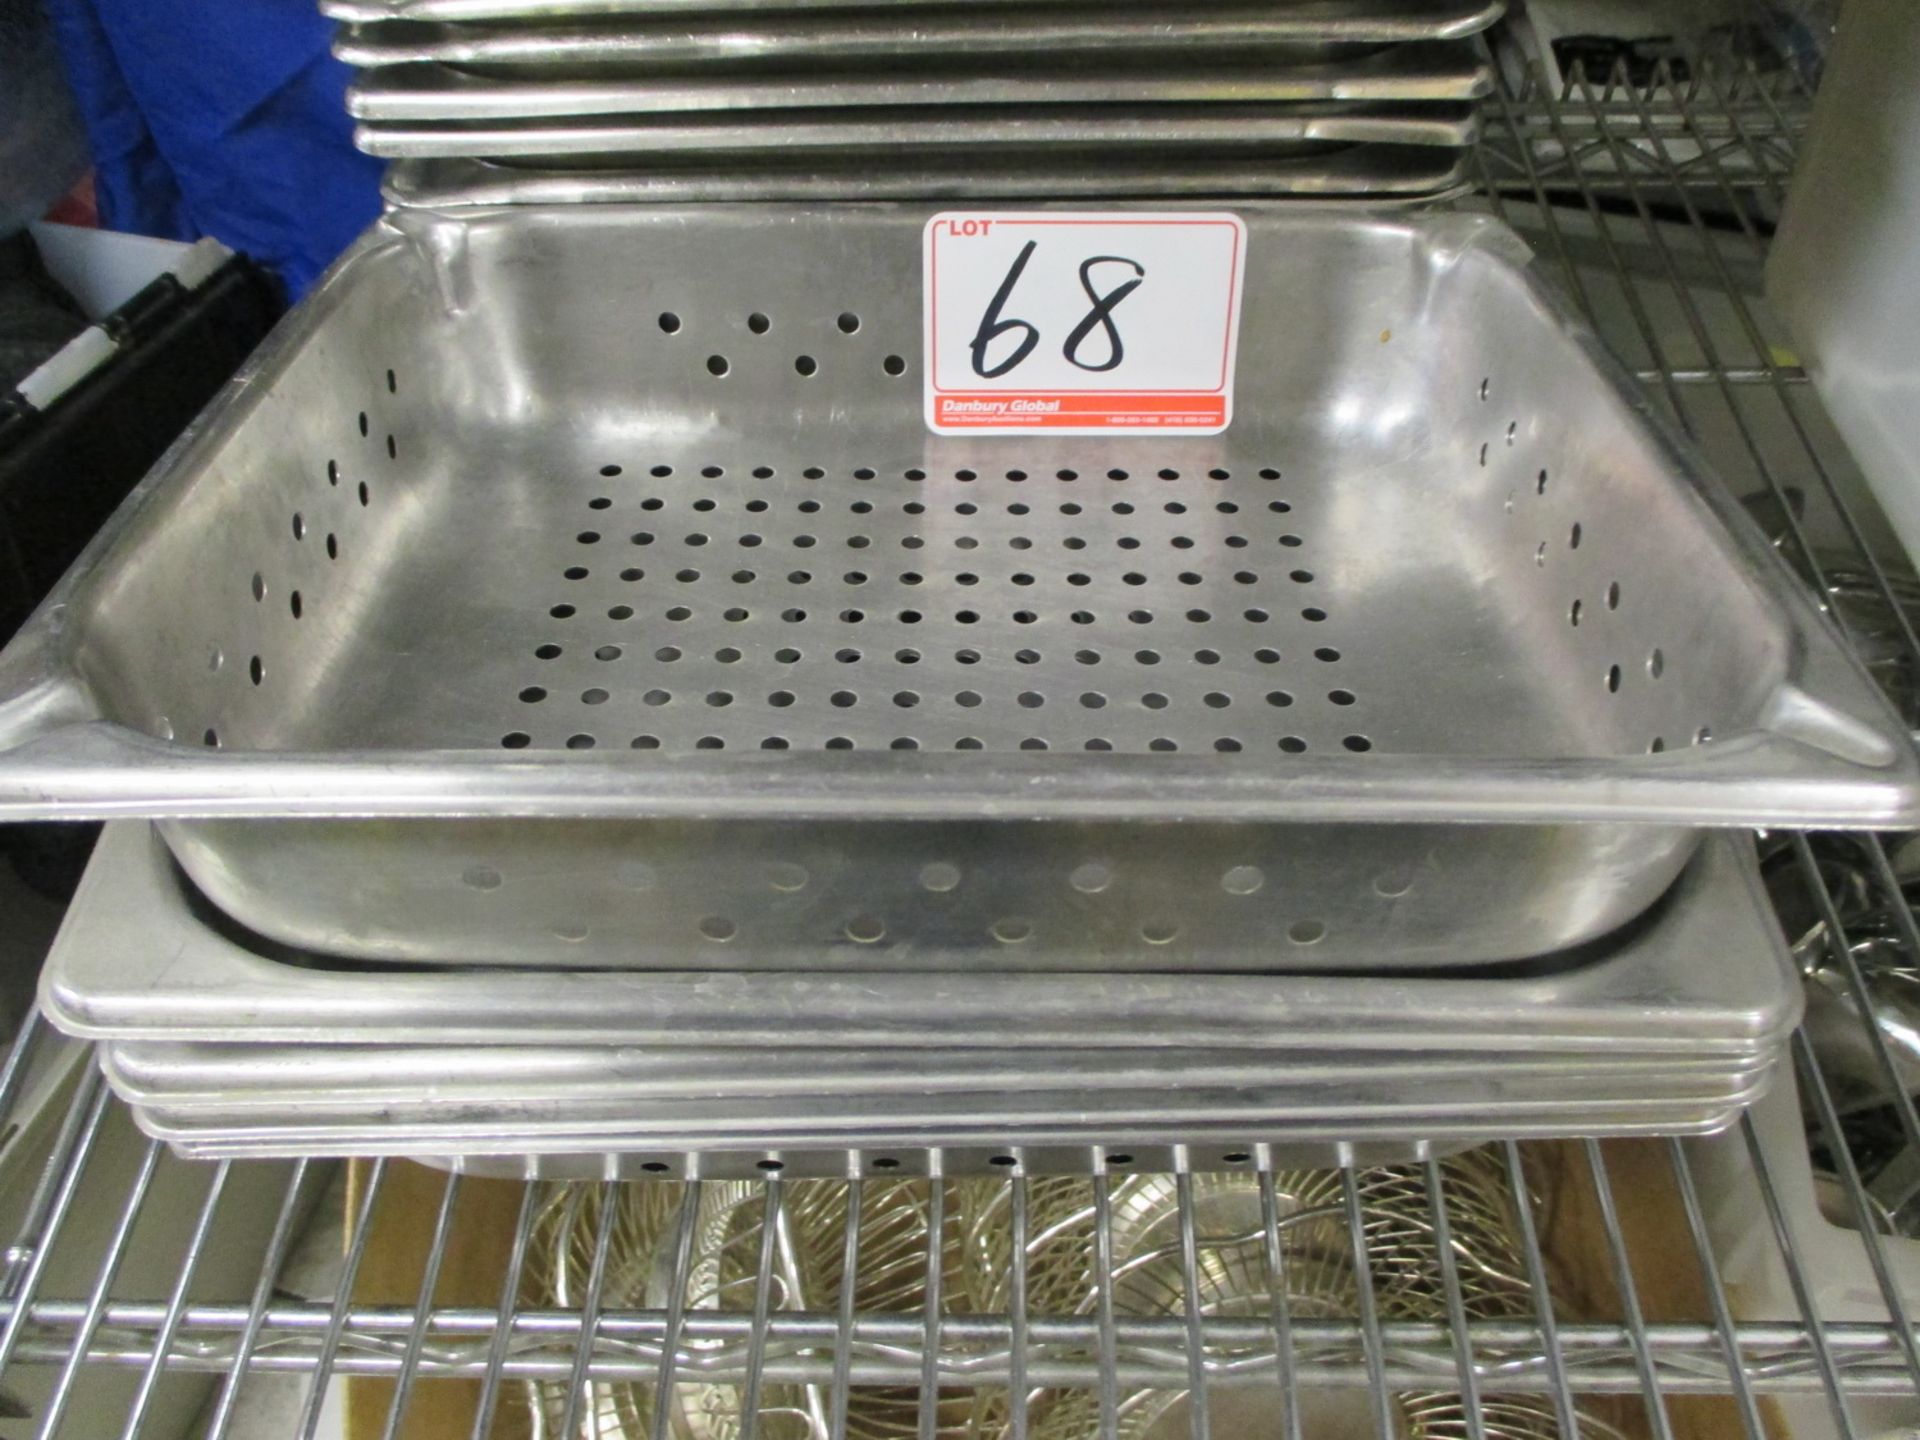 STAINLESS APPRX 10 1/4 X 12 1/2" X 2 1/2" DEEP STEAM FOOD PANS